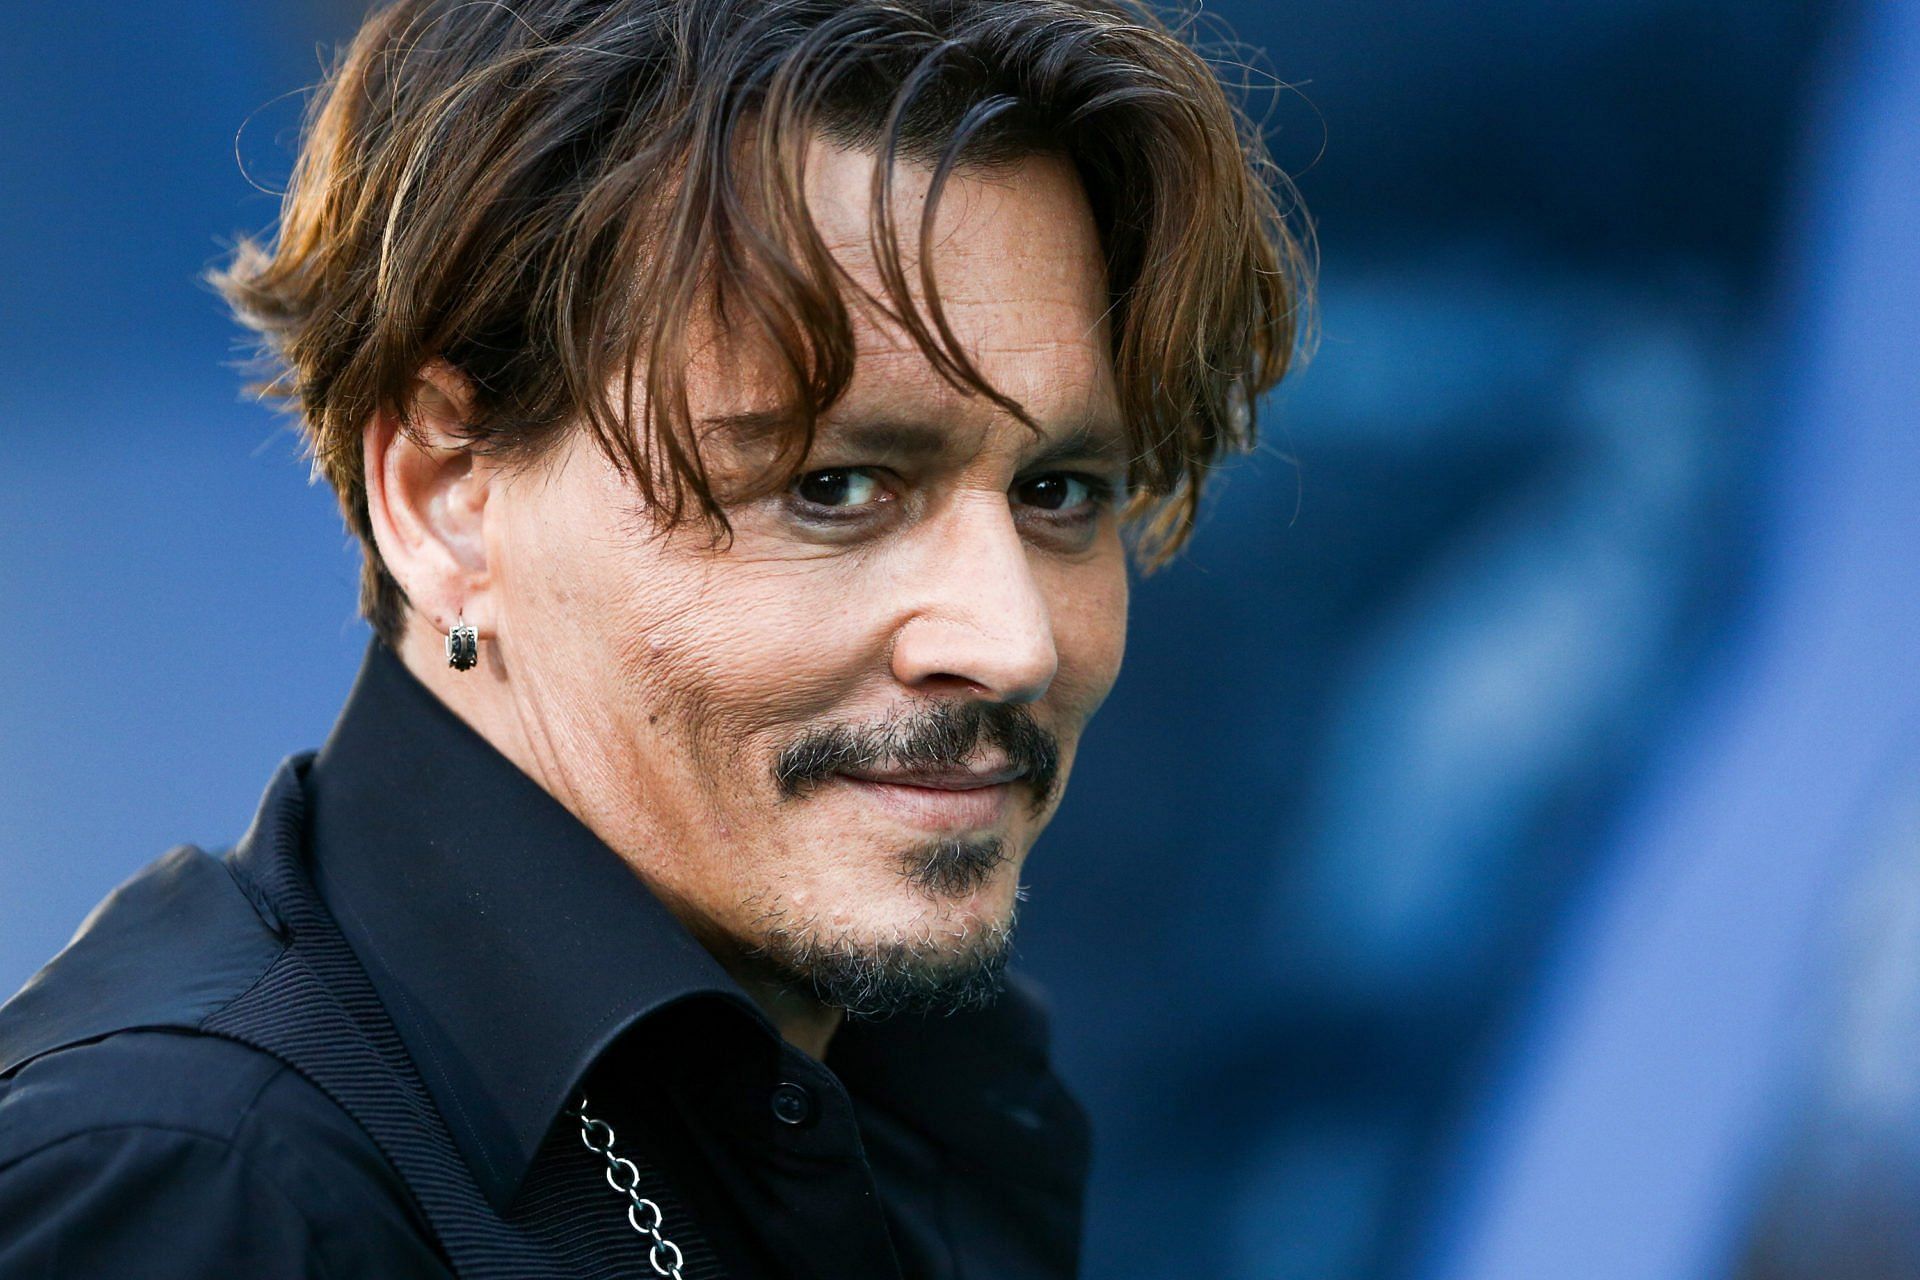 Greg Ellis has shown his support to Depp (Image via Getty) 